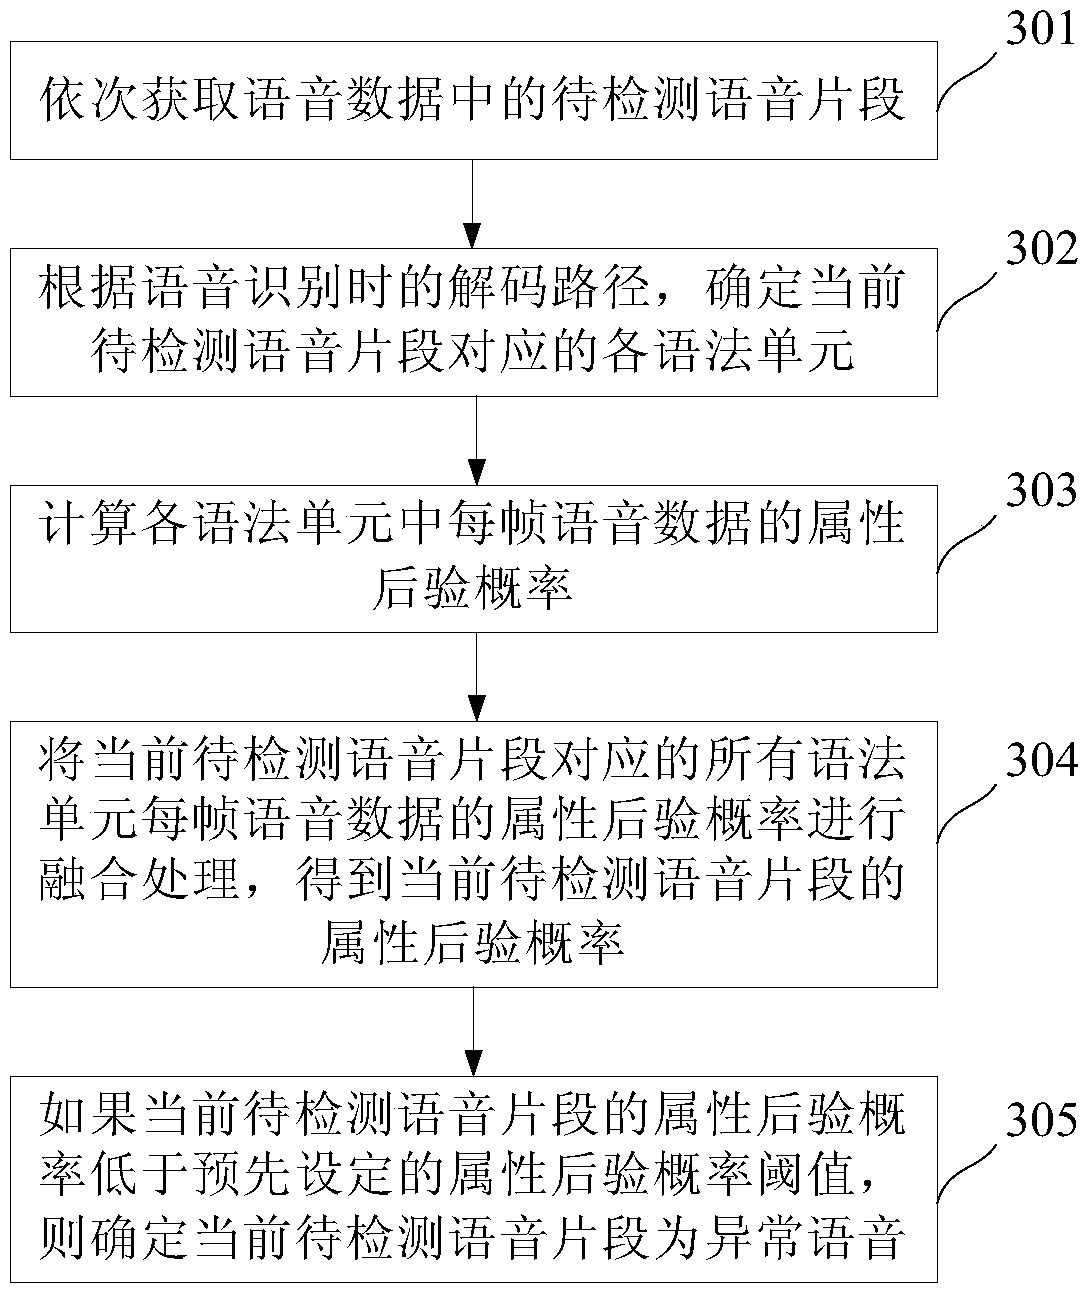 Speech recognition text processing method and system